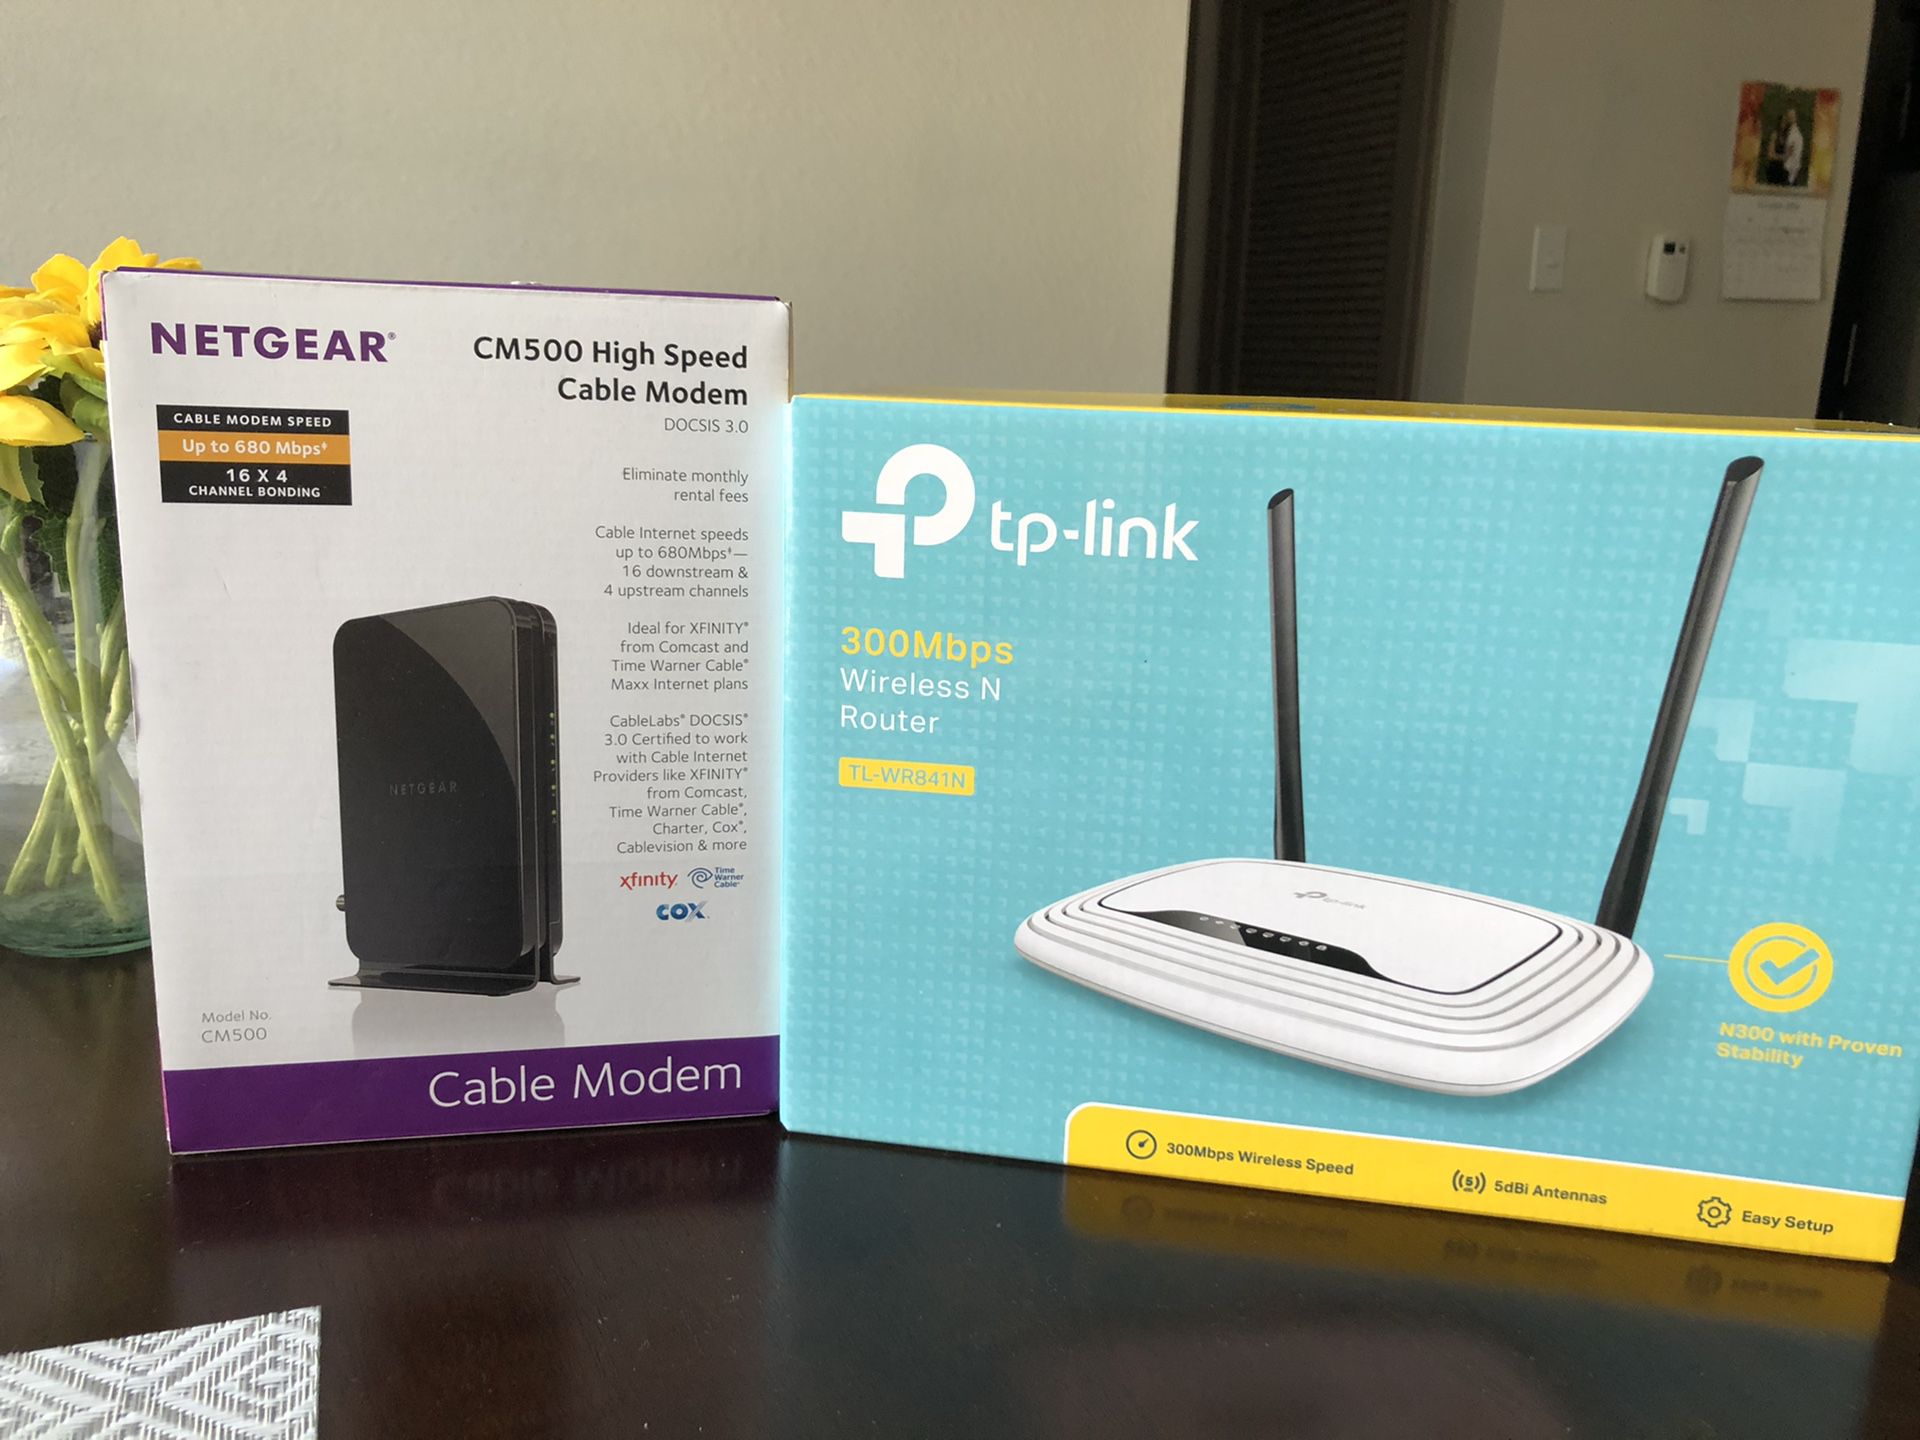 Cable modem and wireless Router